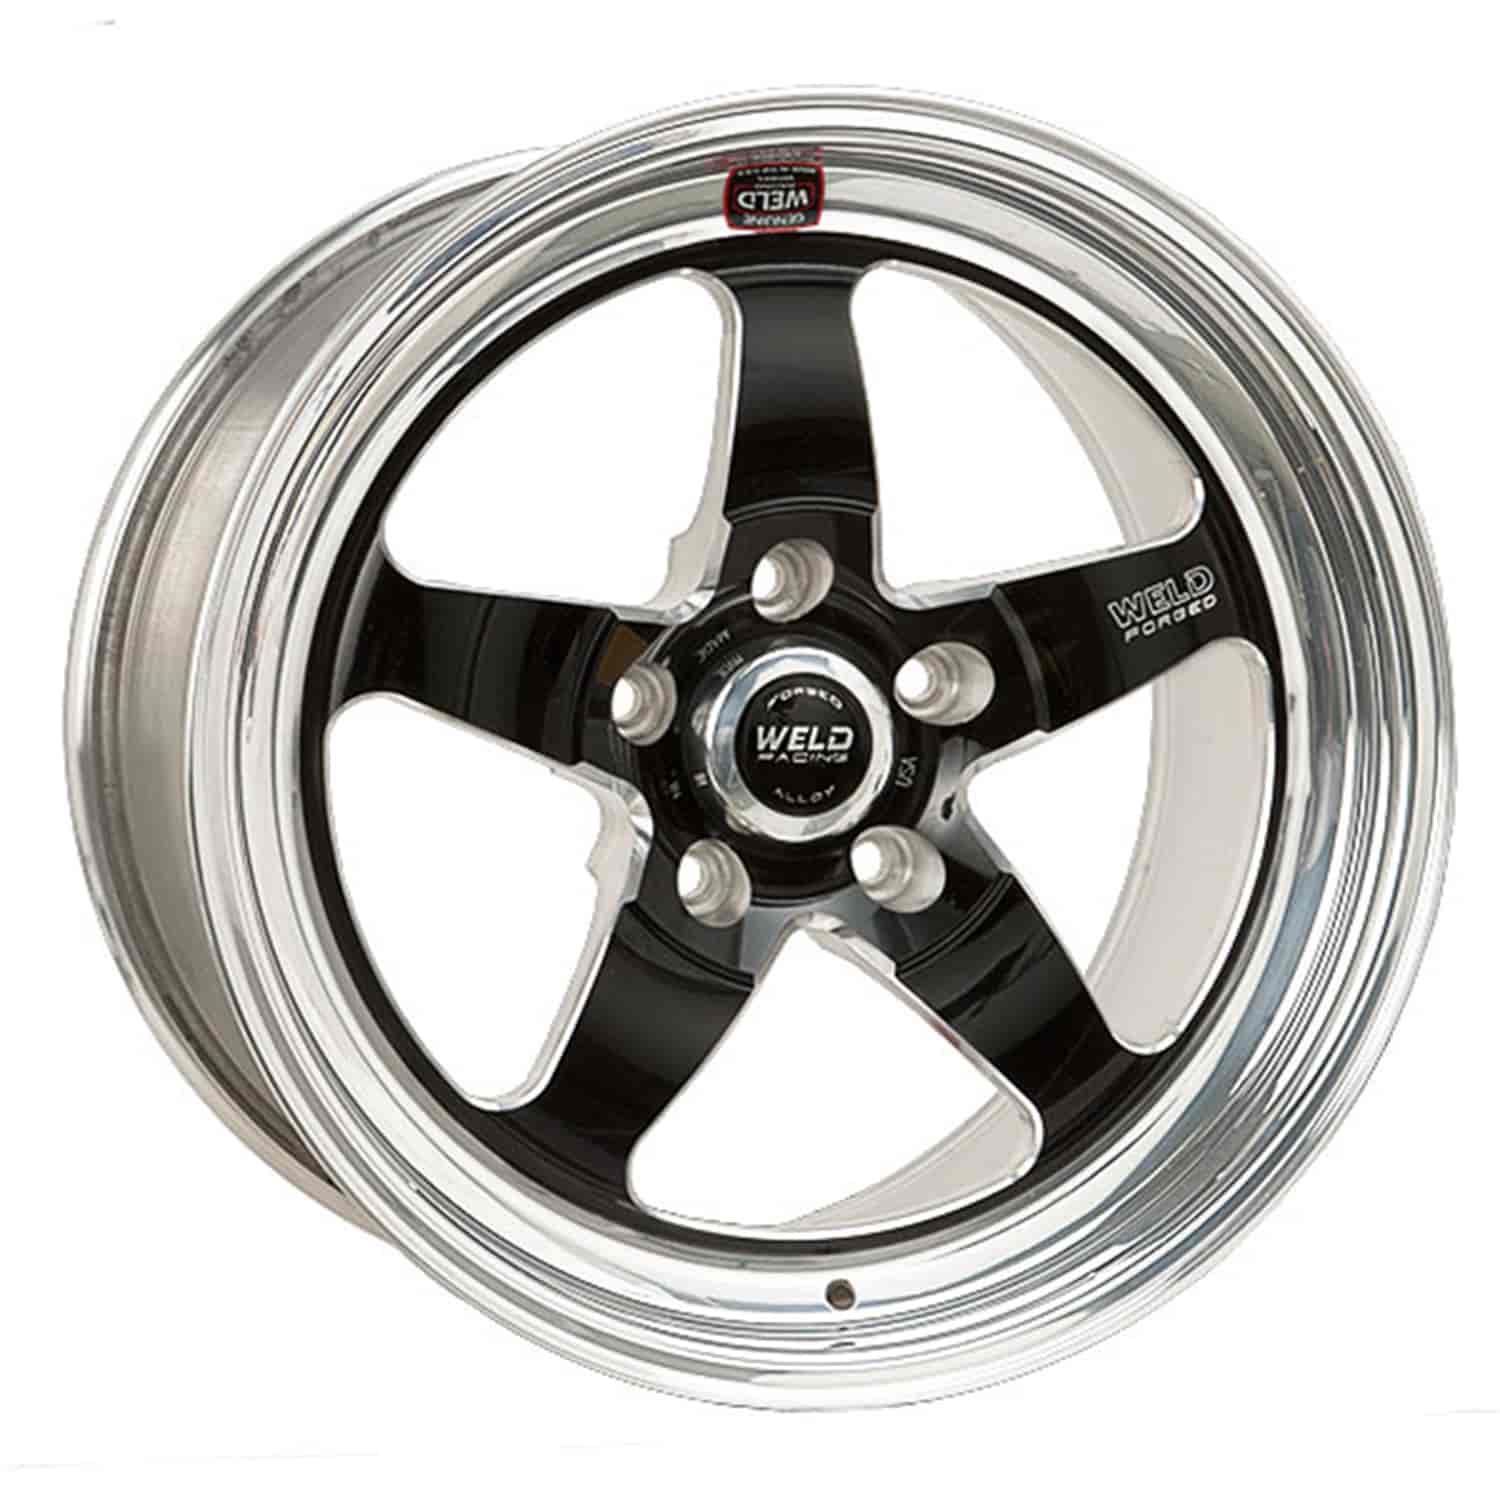 RT-S Series Wheel Size: 17" x 10" Bolt Circle: 5 x 120mm Rear Spacing: 7.80" Offset: +58.42mm